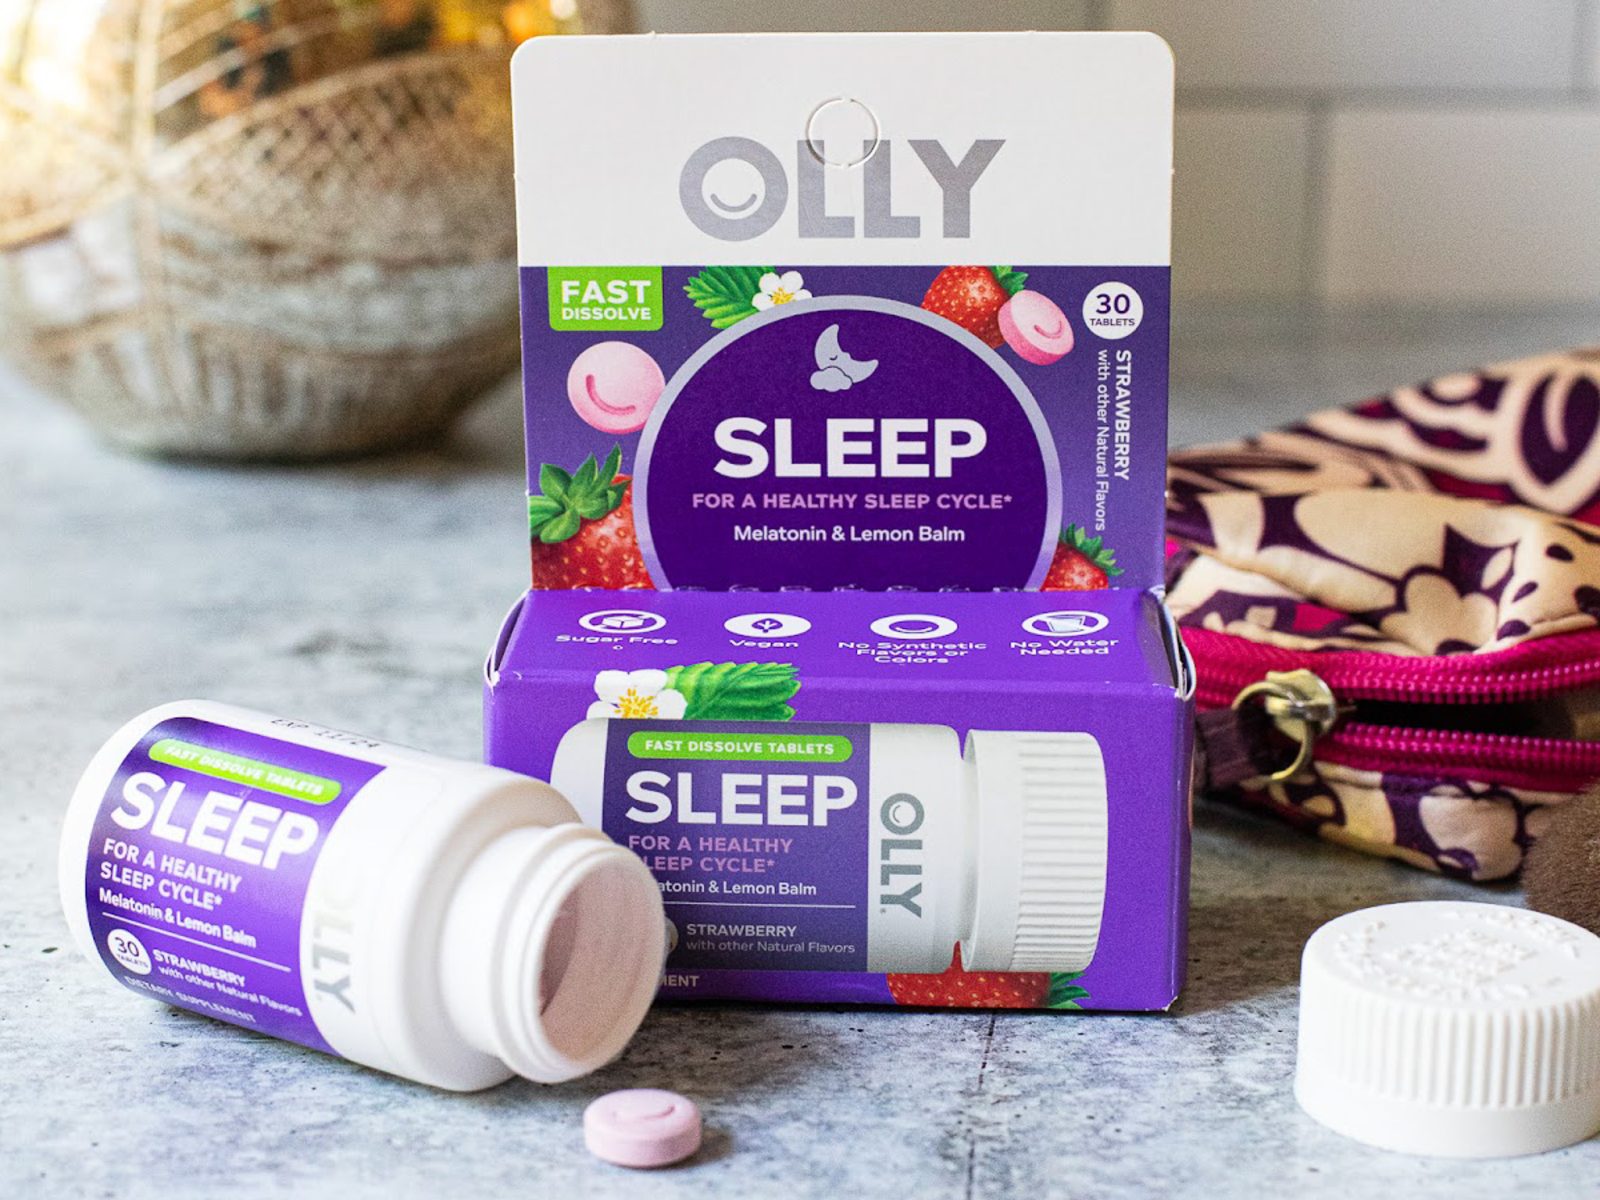 Olly Sleep Supplements Just $5.34 At Kroger – Less Than Half Price!